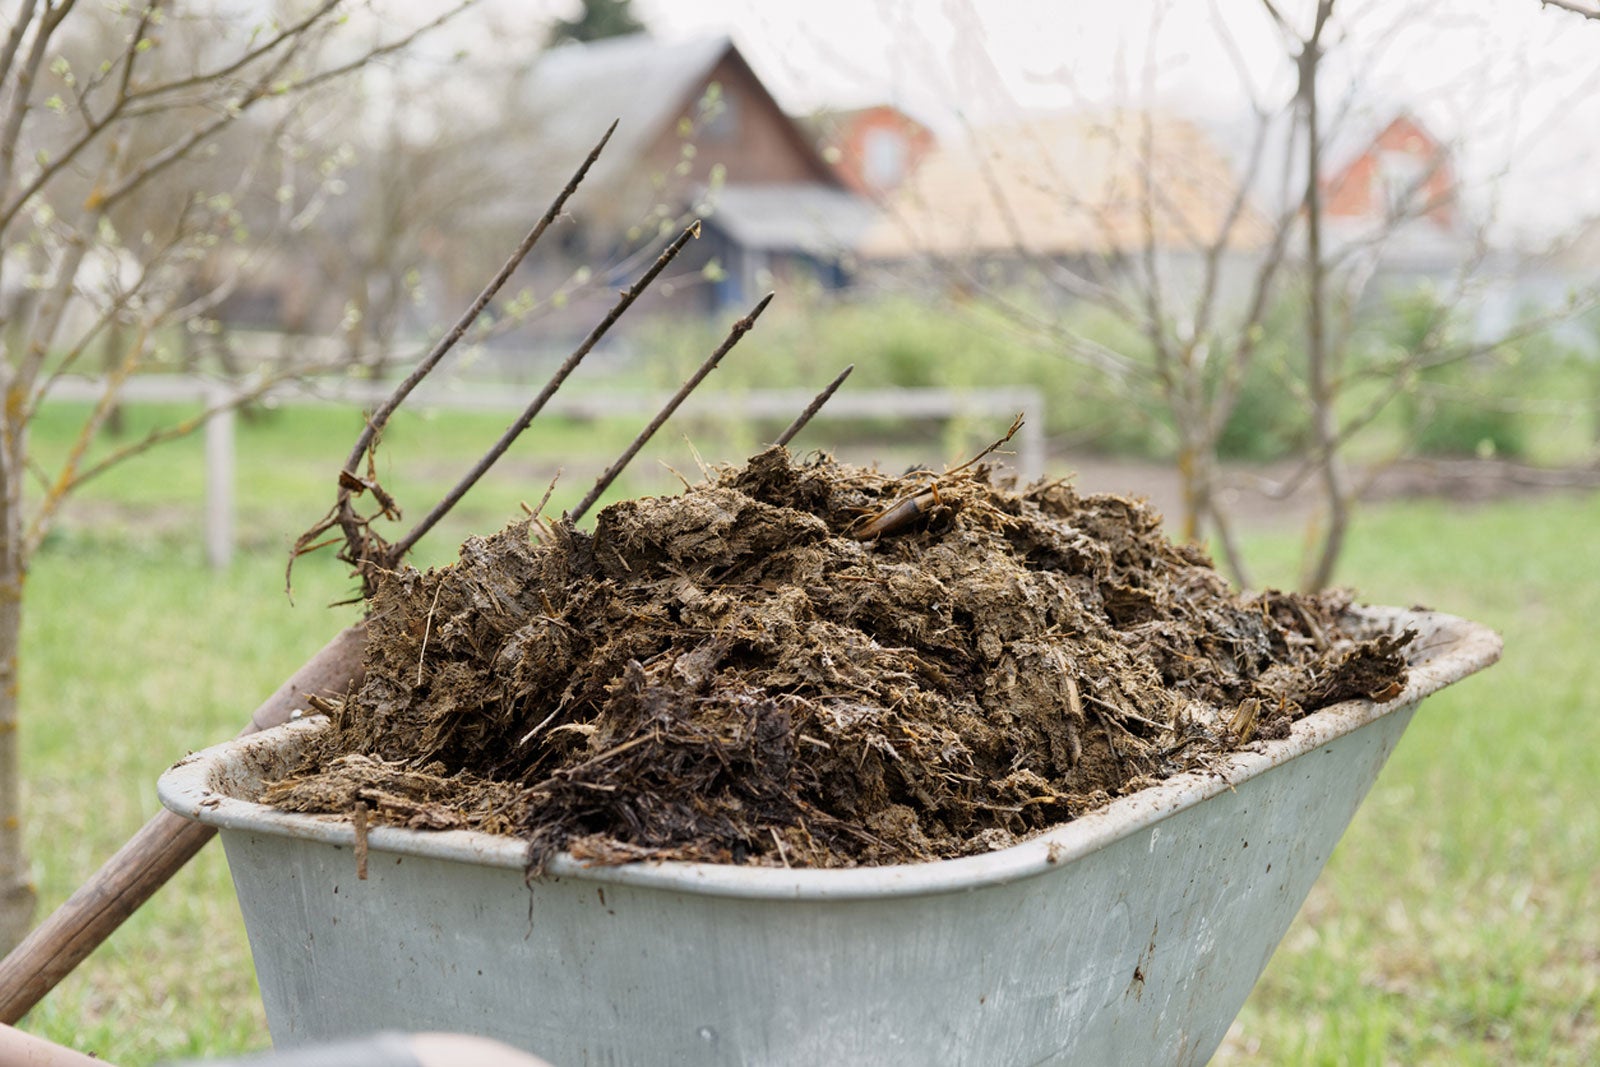 Manure As Fertilizer: How Manure Effects The Soil